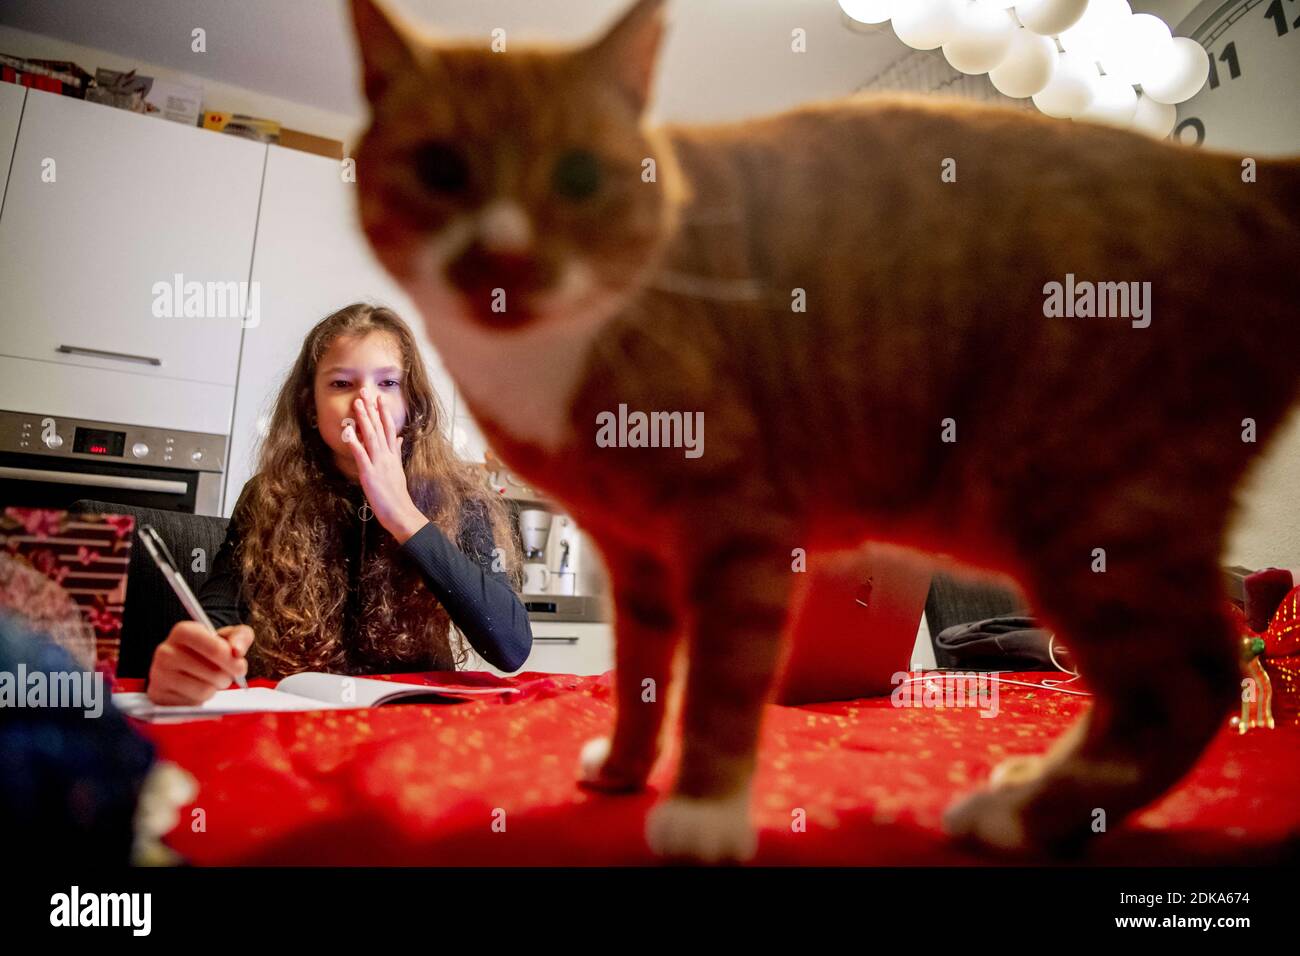 A schoolgirl works at home on December 15, 2020 in Rotterdam, Netherlands. Dutch Prime Minister Mark Rutte informed the public that due to an increase in coronavirus infections and Covid-19 hospitalizations, the Netherlands will enter a lockdown starting at midnight for five weeks. Among other measures, starting on Wednesday, all schools in the Netherlands will be closed. 'Until January 18, distance education will become the norm. That is a radical, but inevitable decision. Exceptions apply to students in their final year and students who need extra help. This also applies to children with par Stock Photo